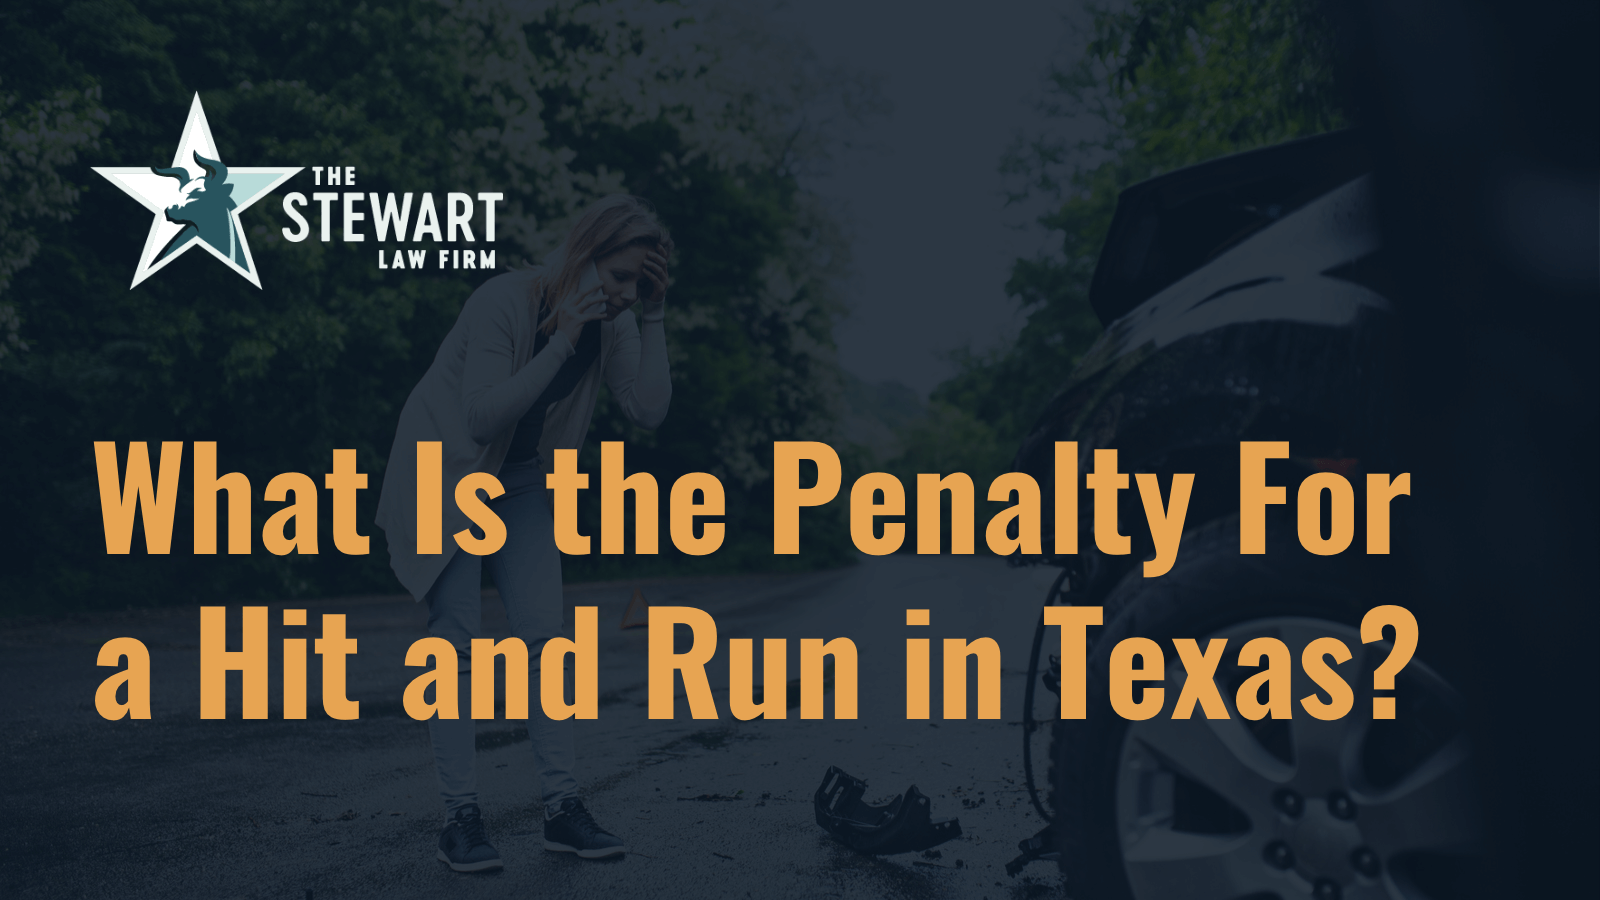 What Is the Penalty For a Hit and Run in Texas - the stephen stewart law firm - austin texas personal injury lawyer